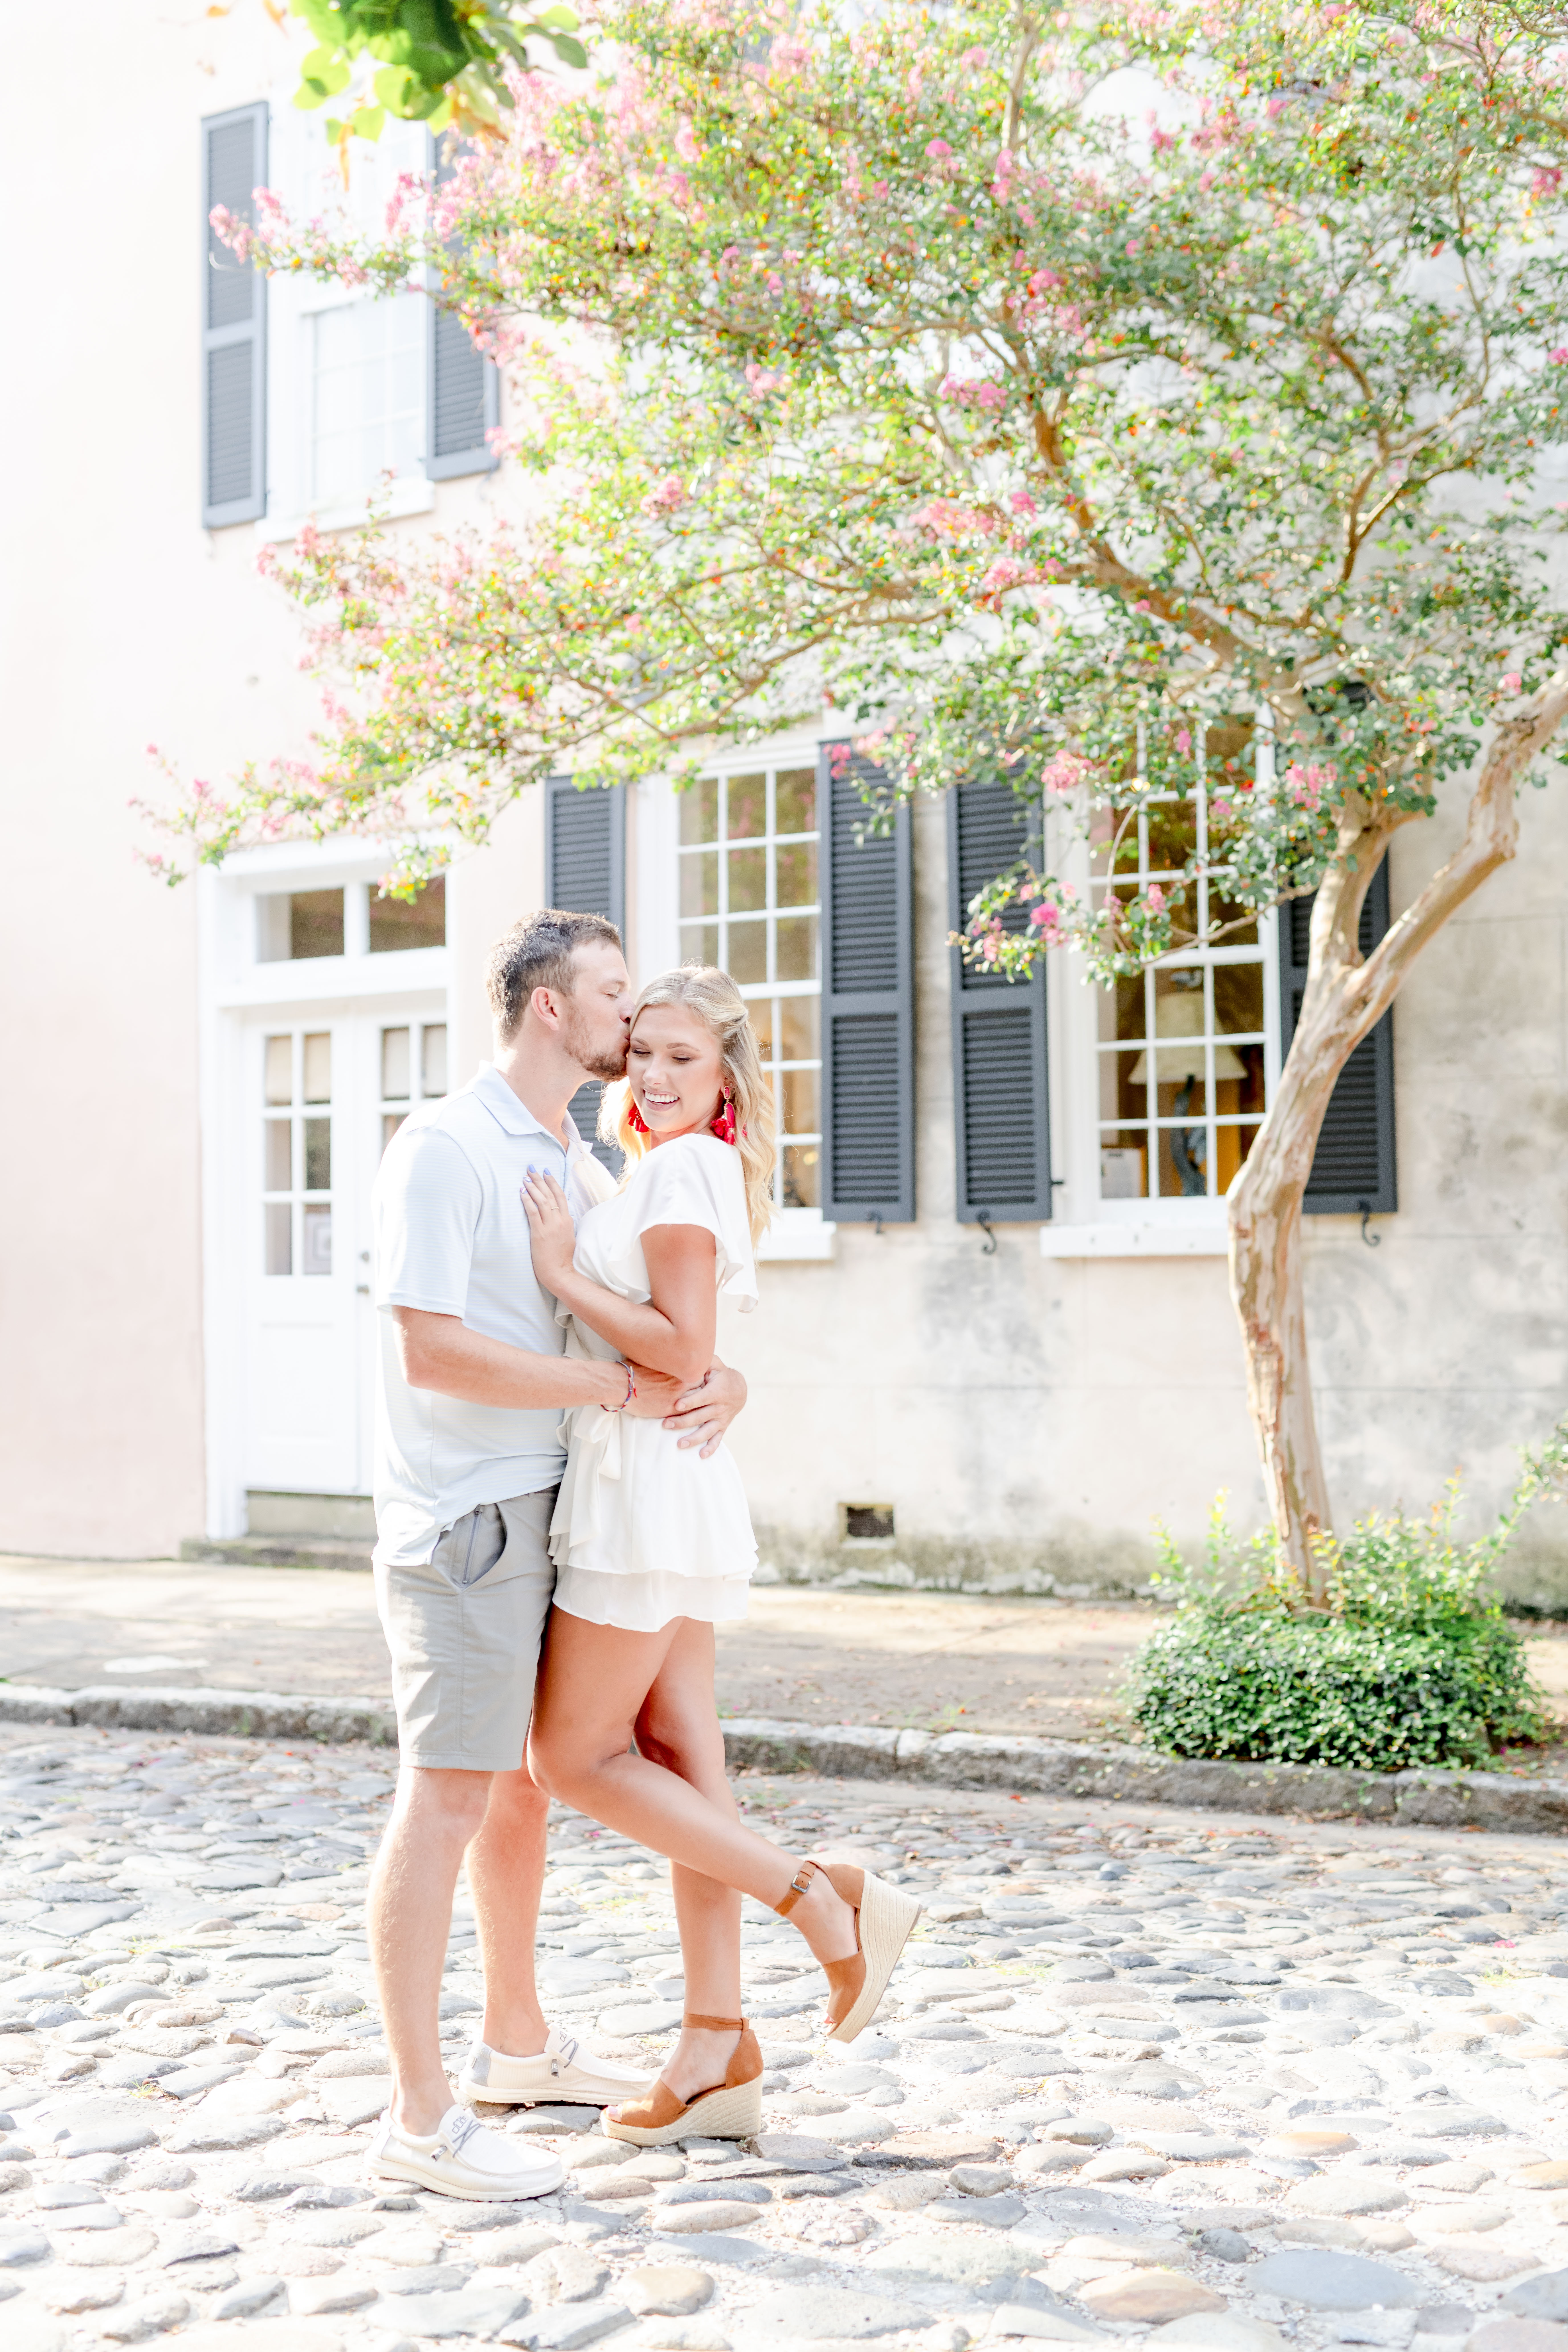 Engagement Photos in Charleston South Carolina on Charlmers Street